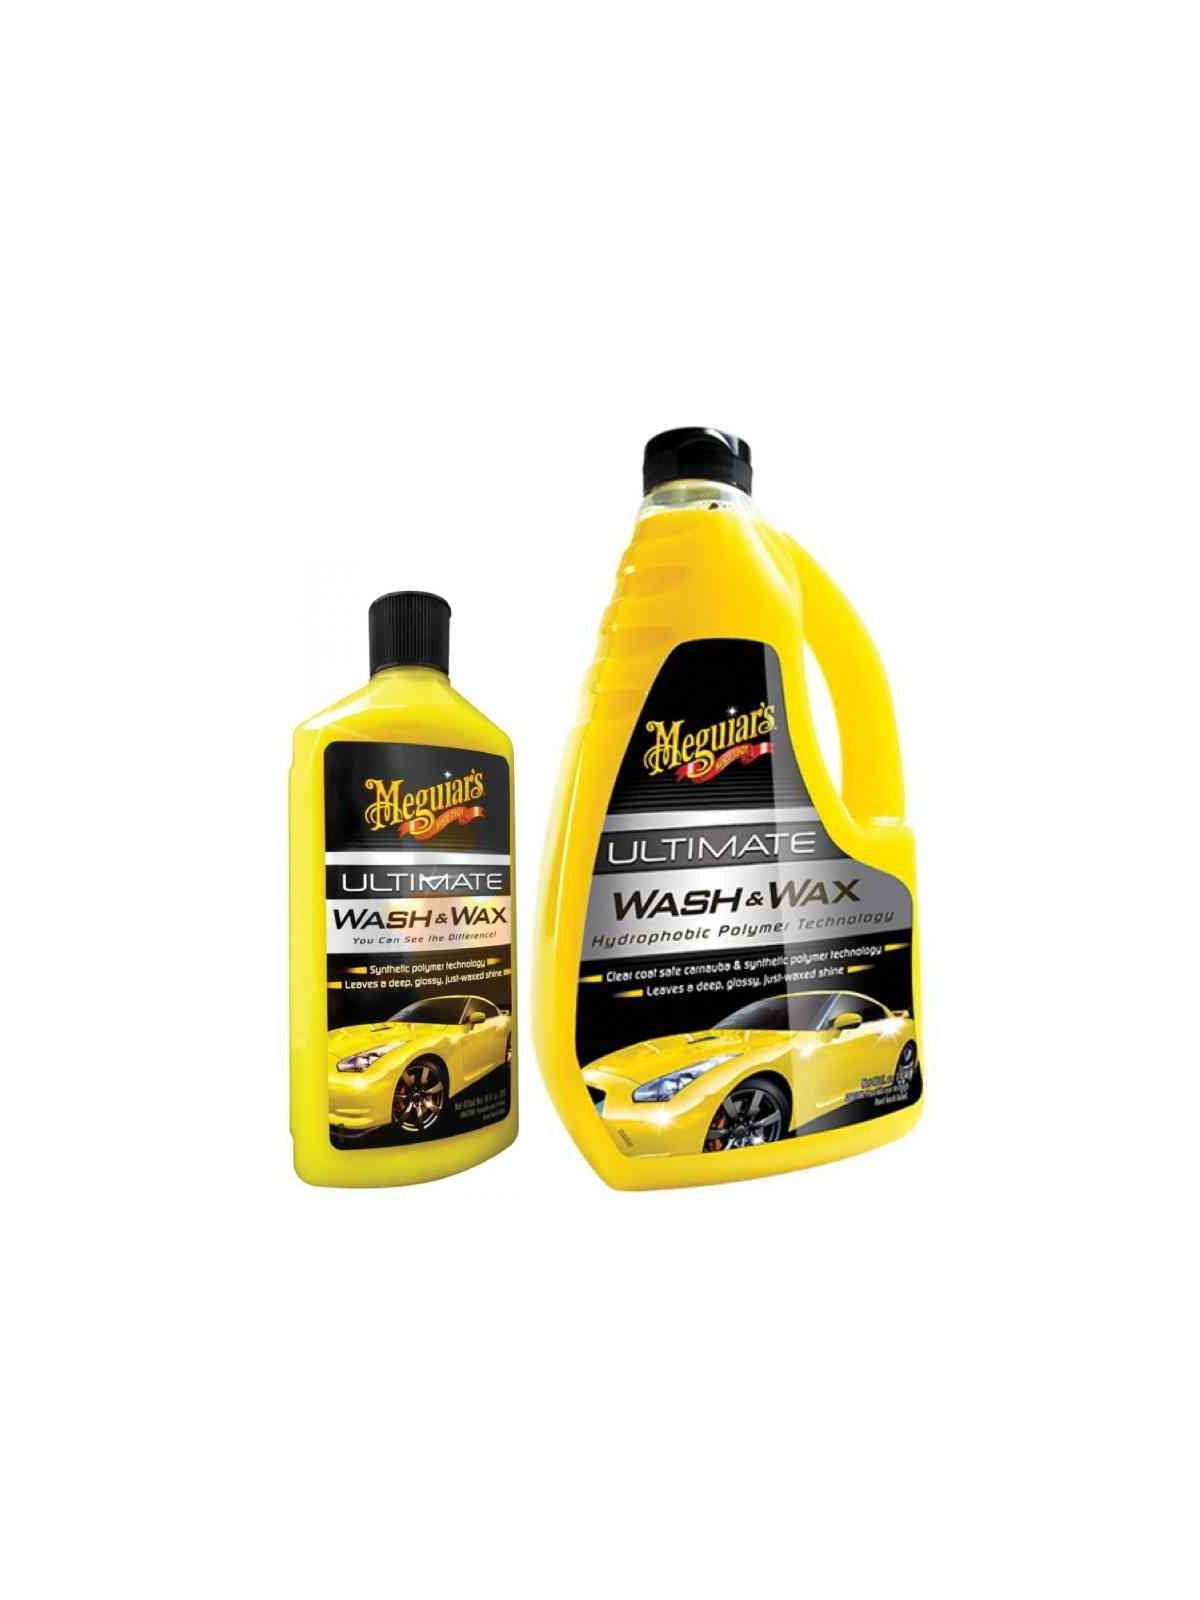 Meguiar's New Zealand on Instagram: Plastics don't have to be